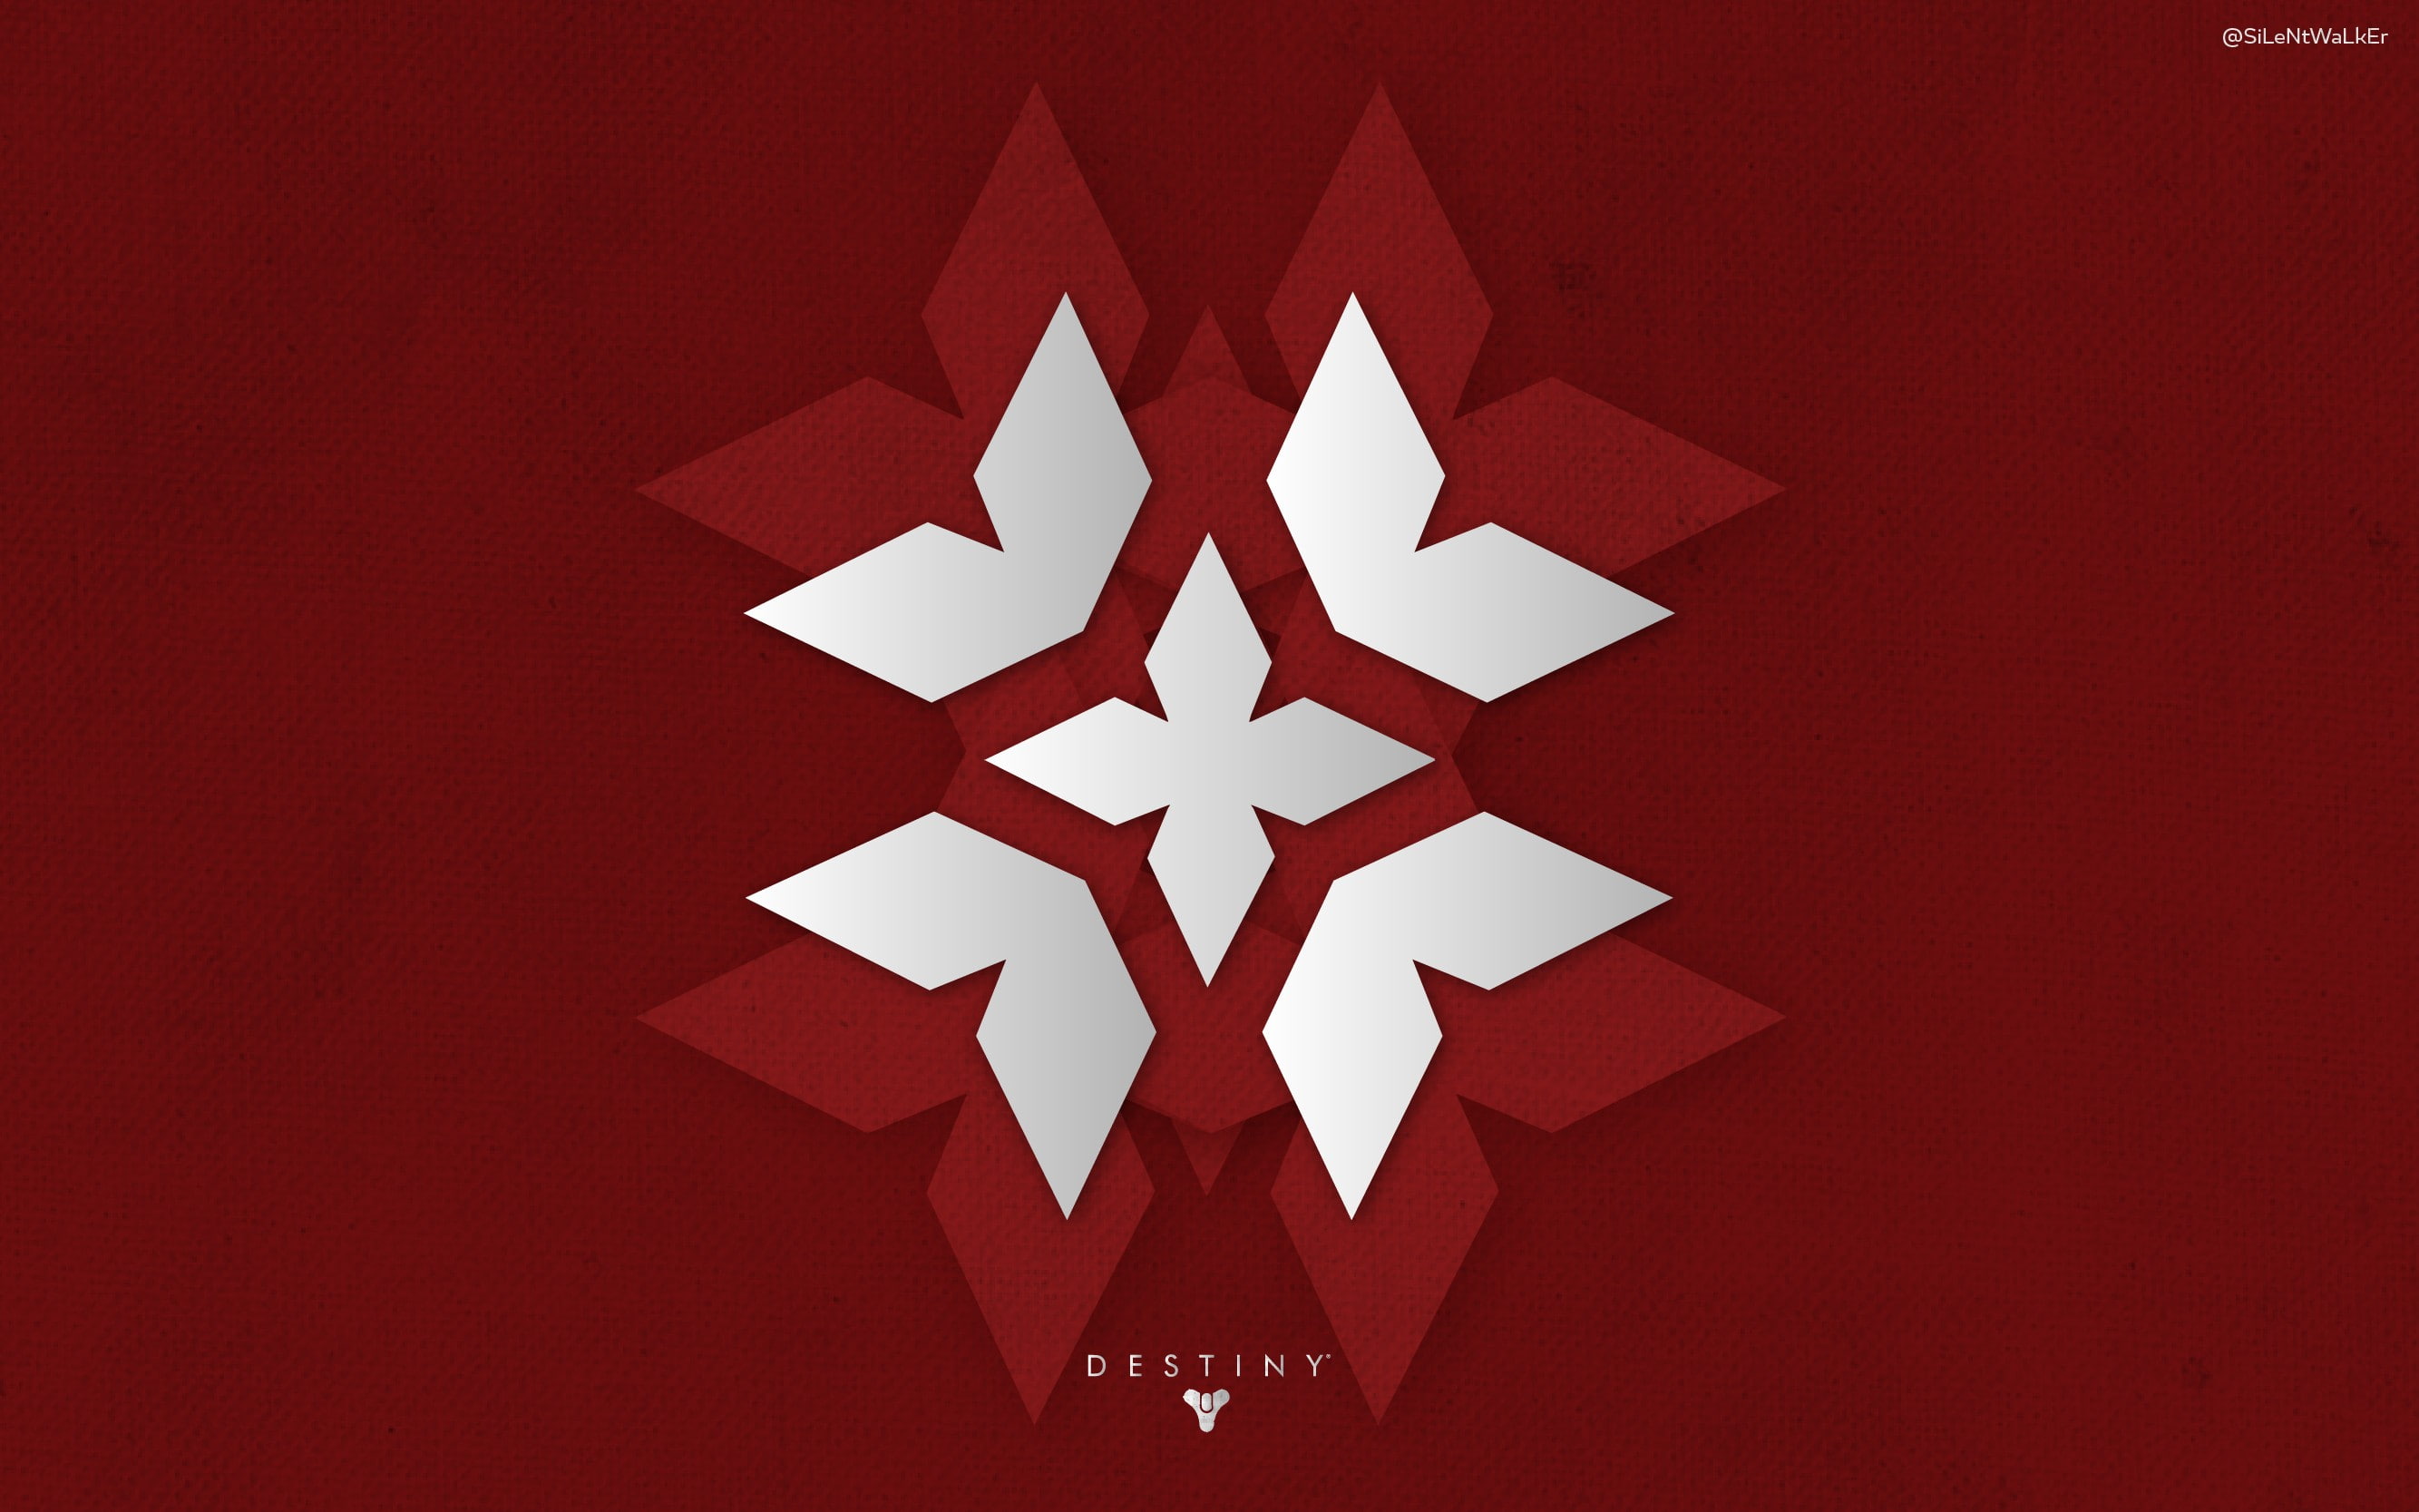 Destiny (video game), video games, red, star shape, indoors